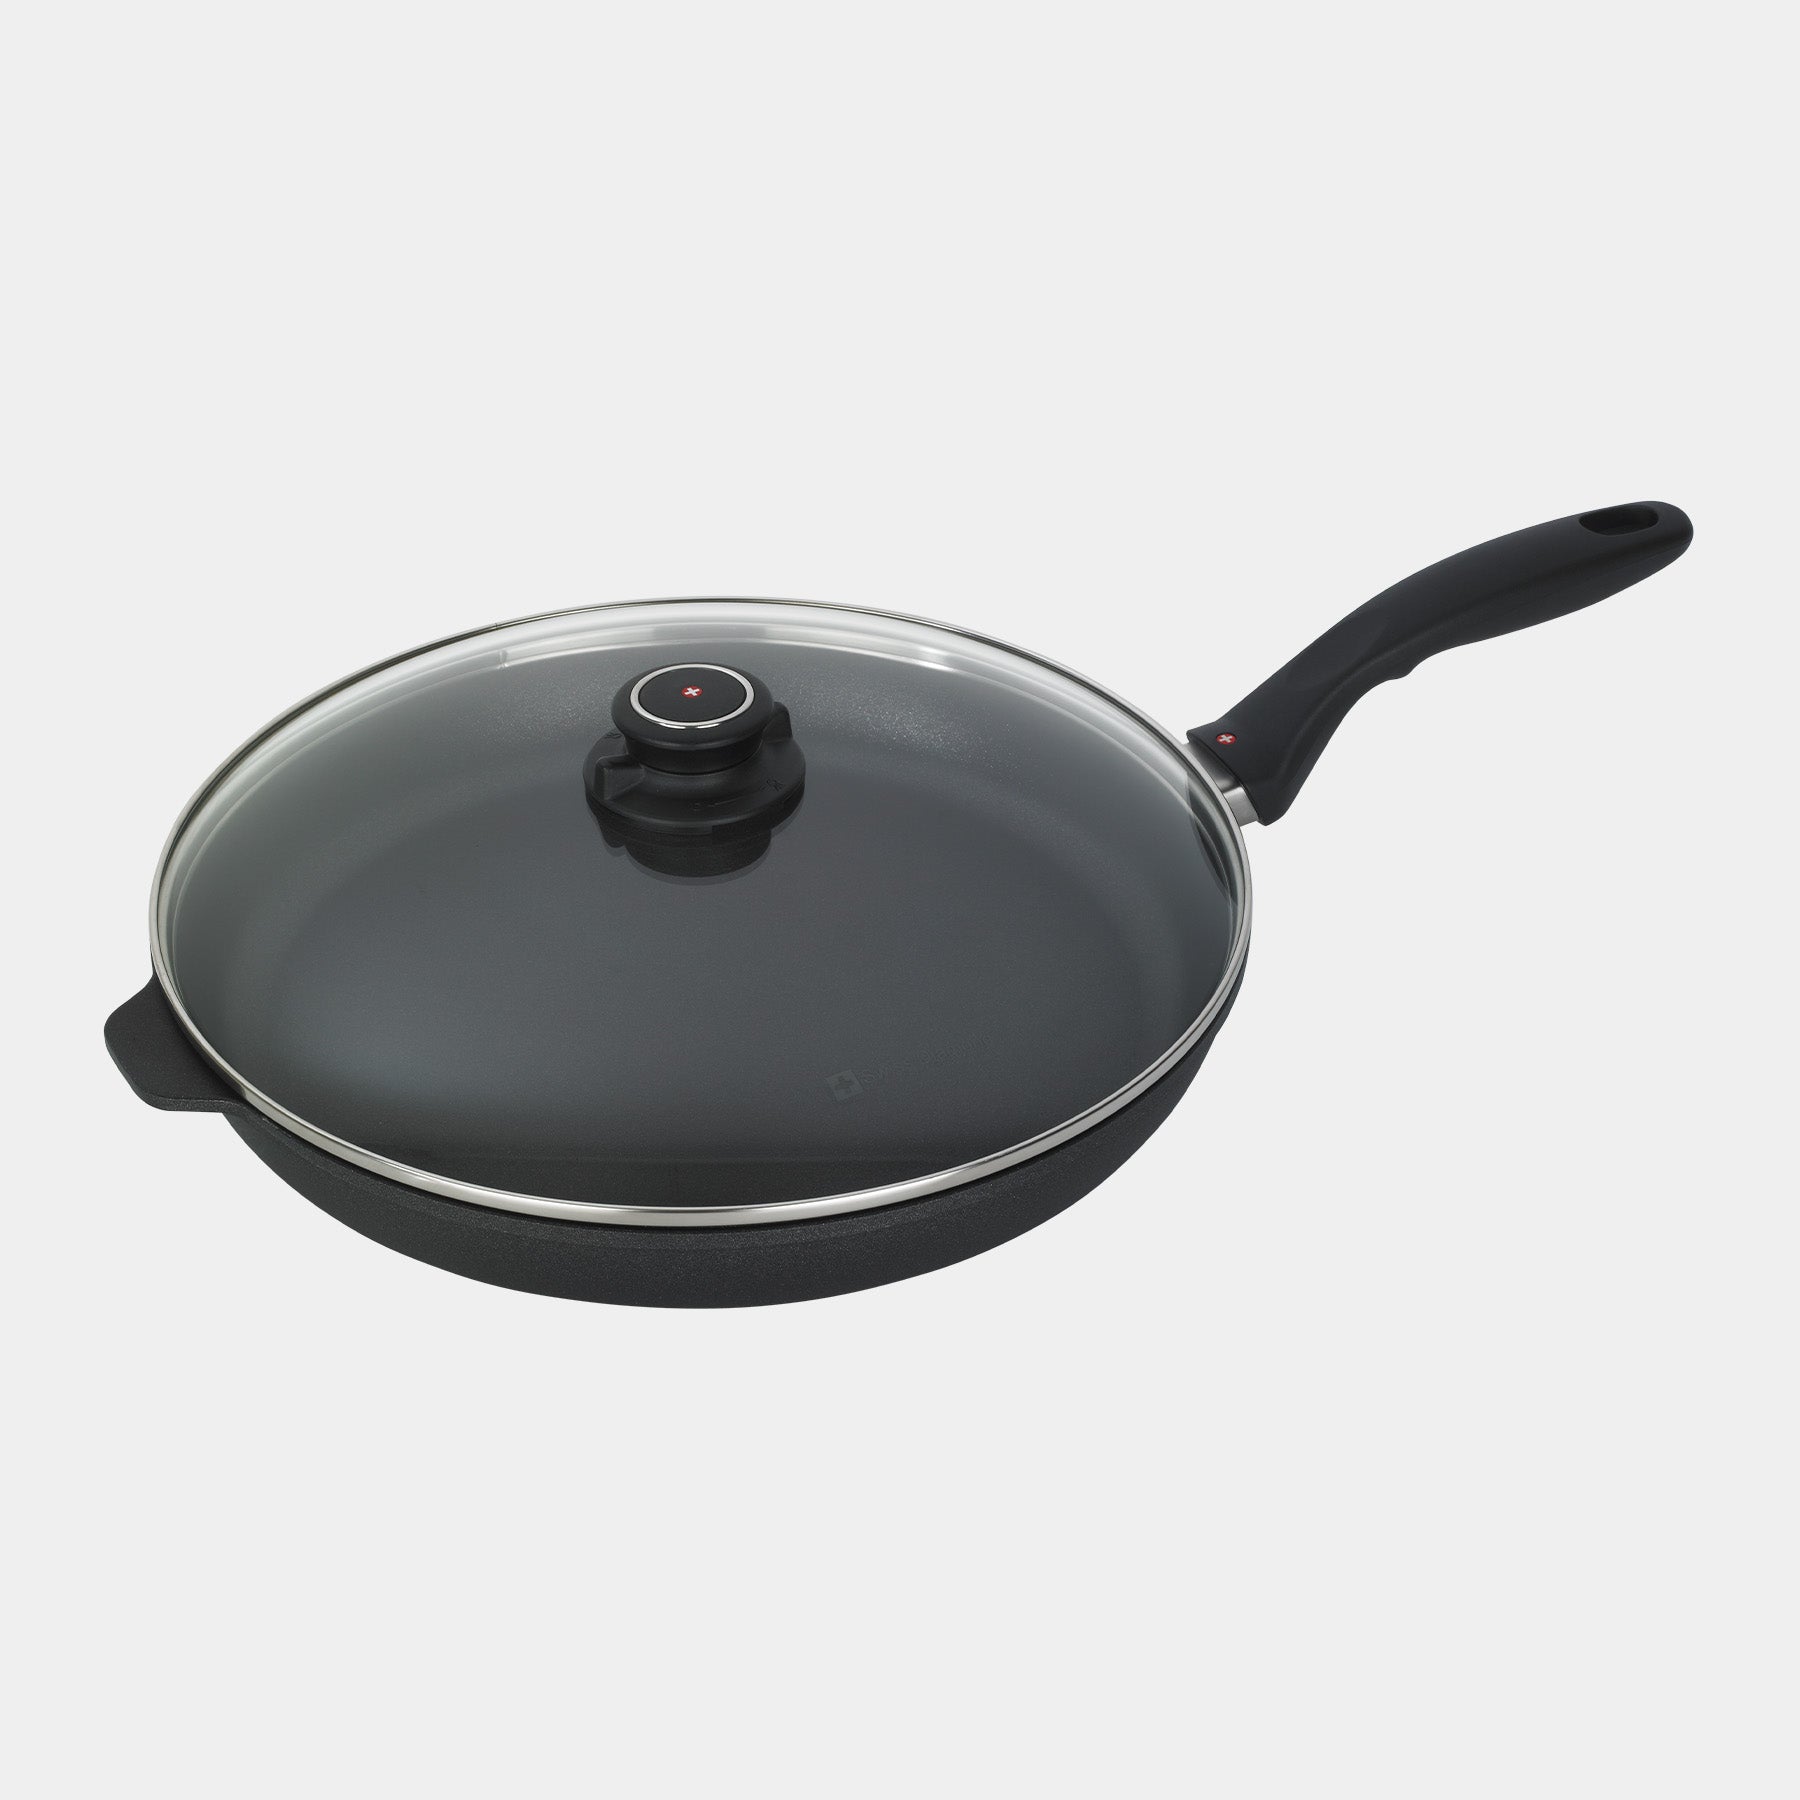 XD Nonstick 12.5" Fry Pan with glass lid